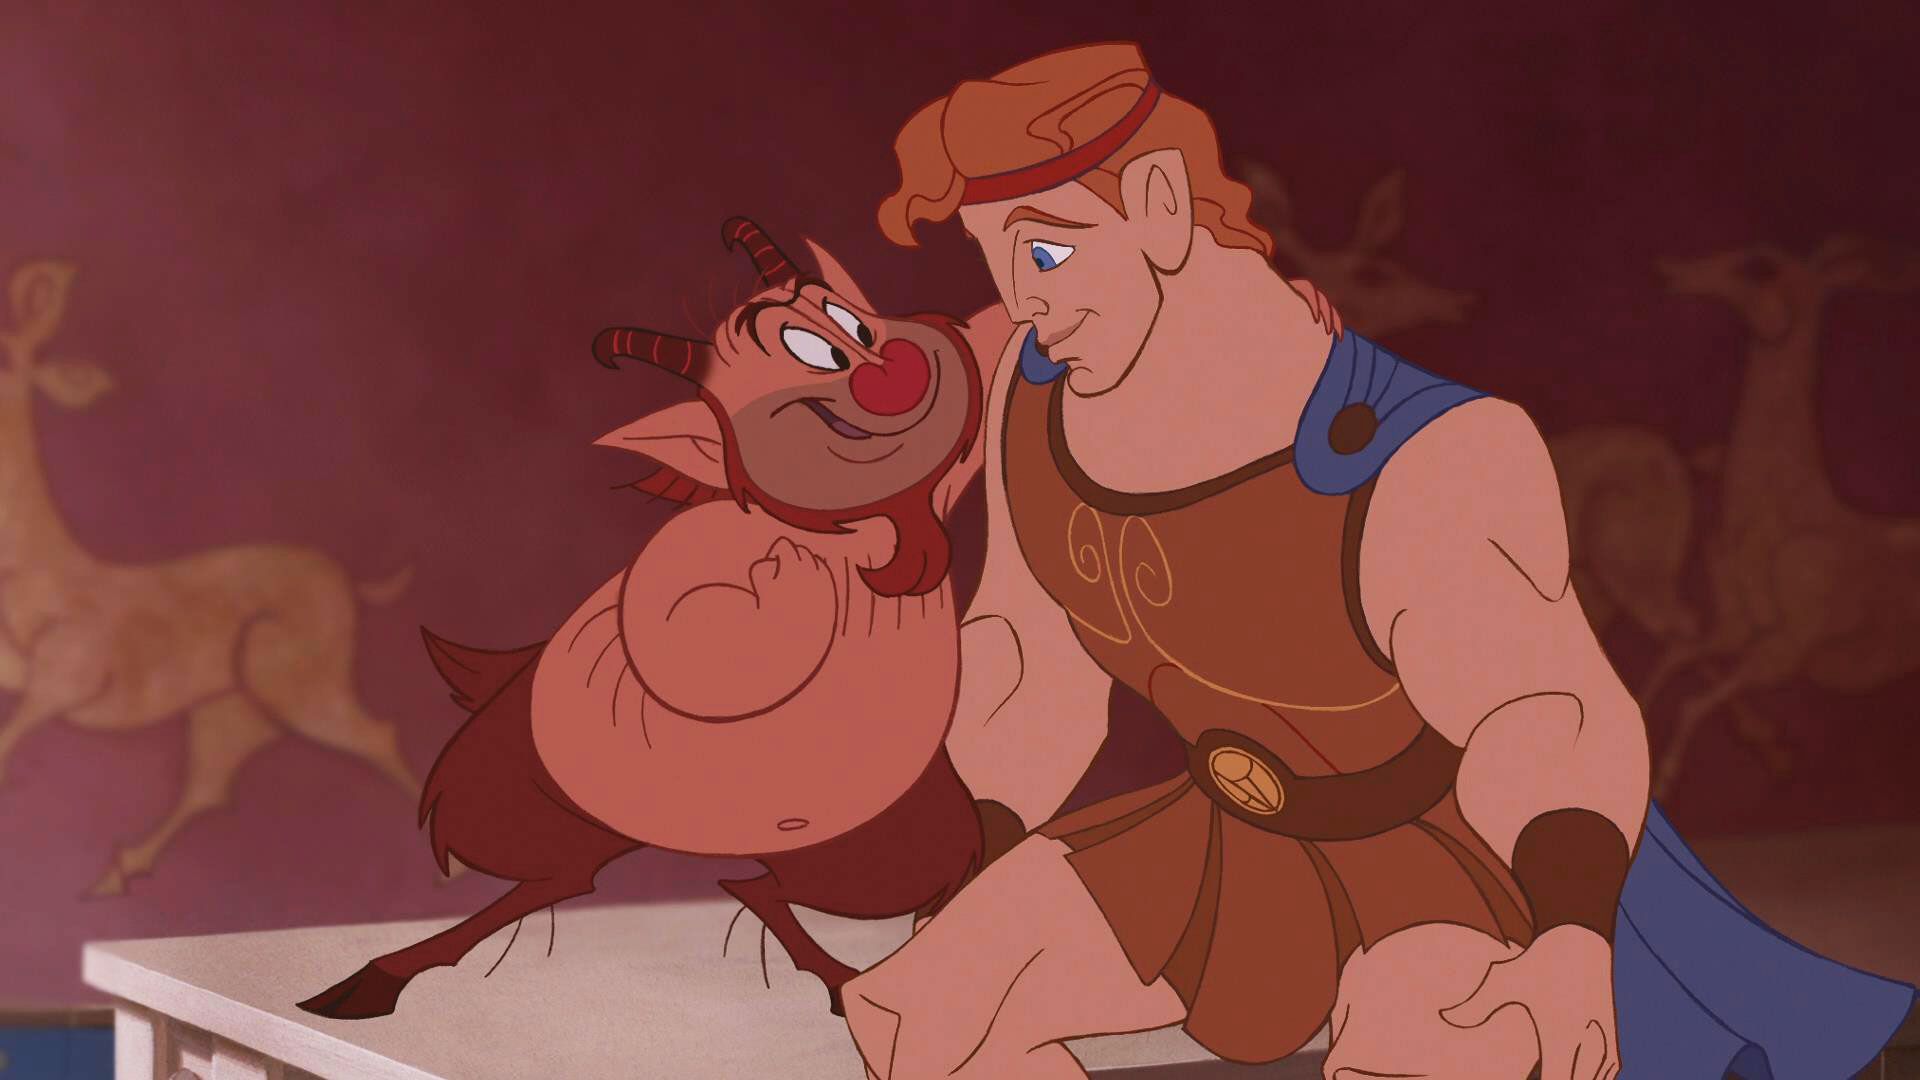 Josh Gad Refuses To Replace Danny DeVito as Phil in Disney’s Live-Action ‘Hercules’